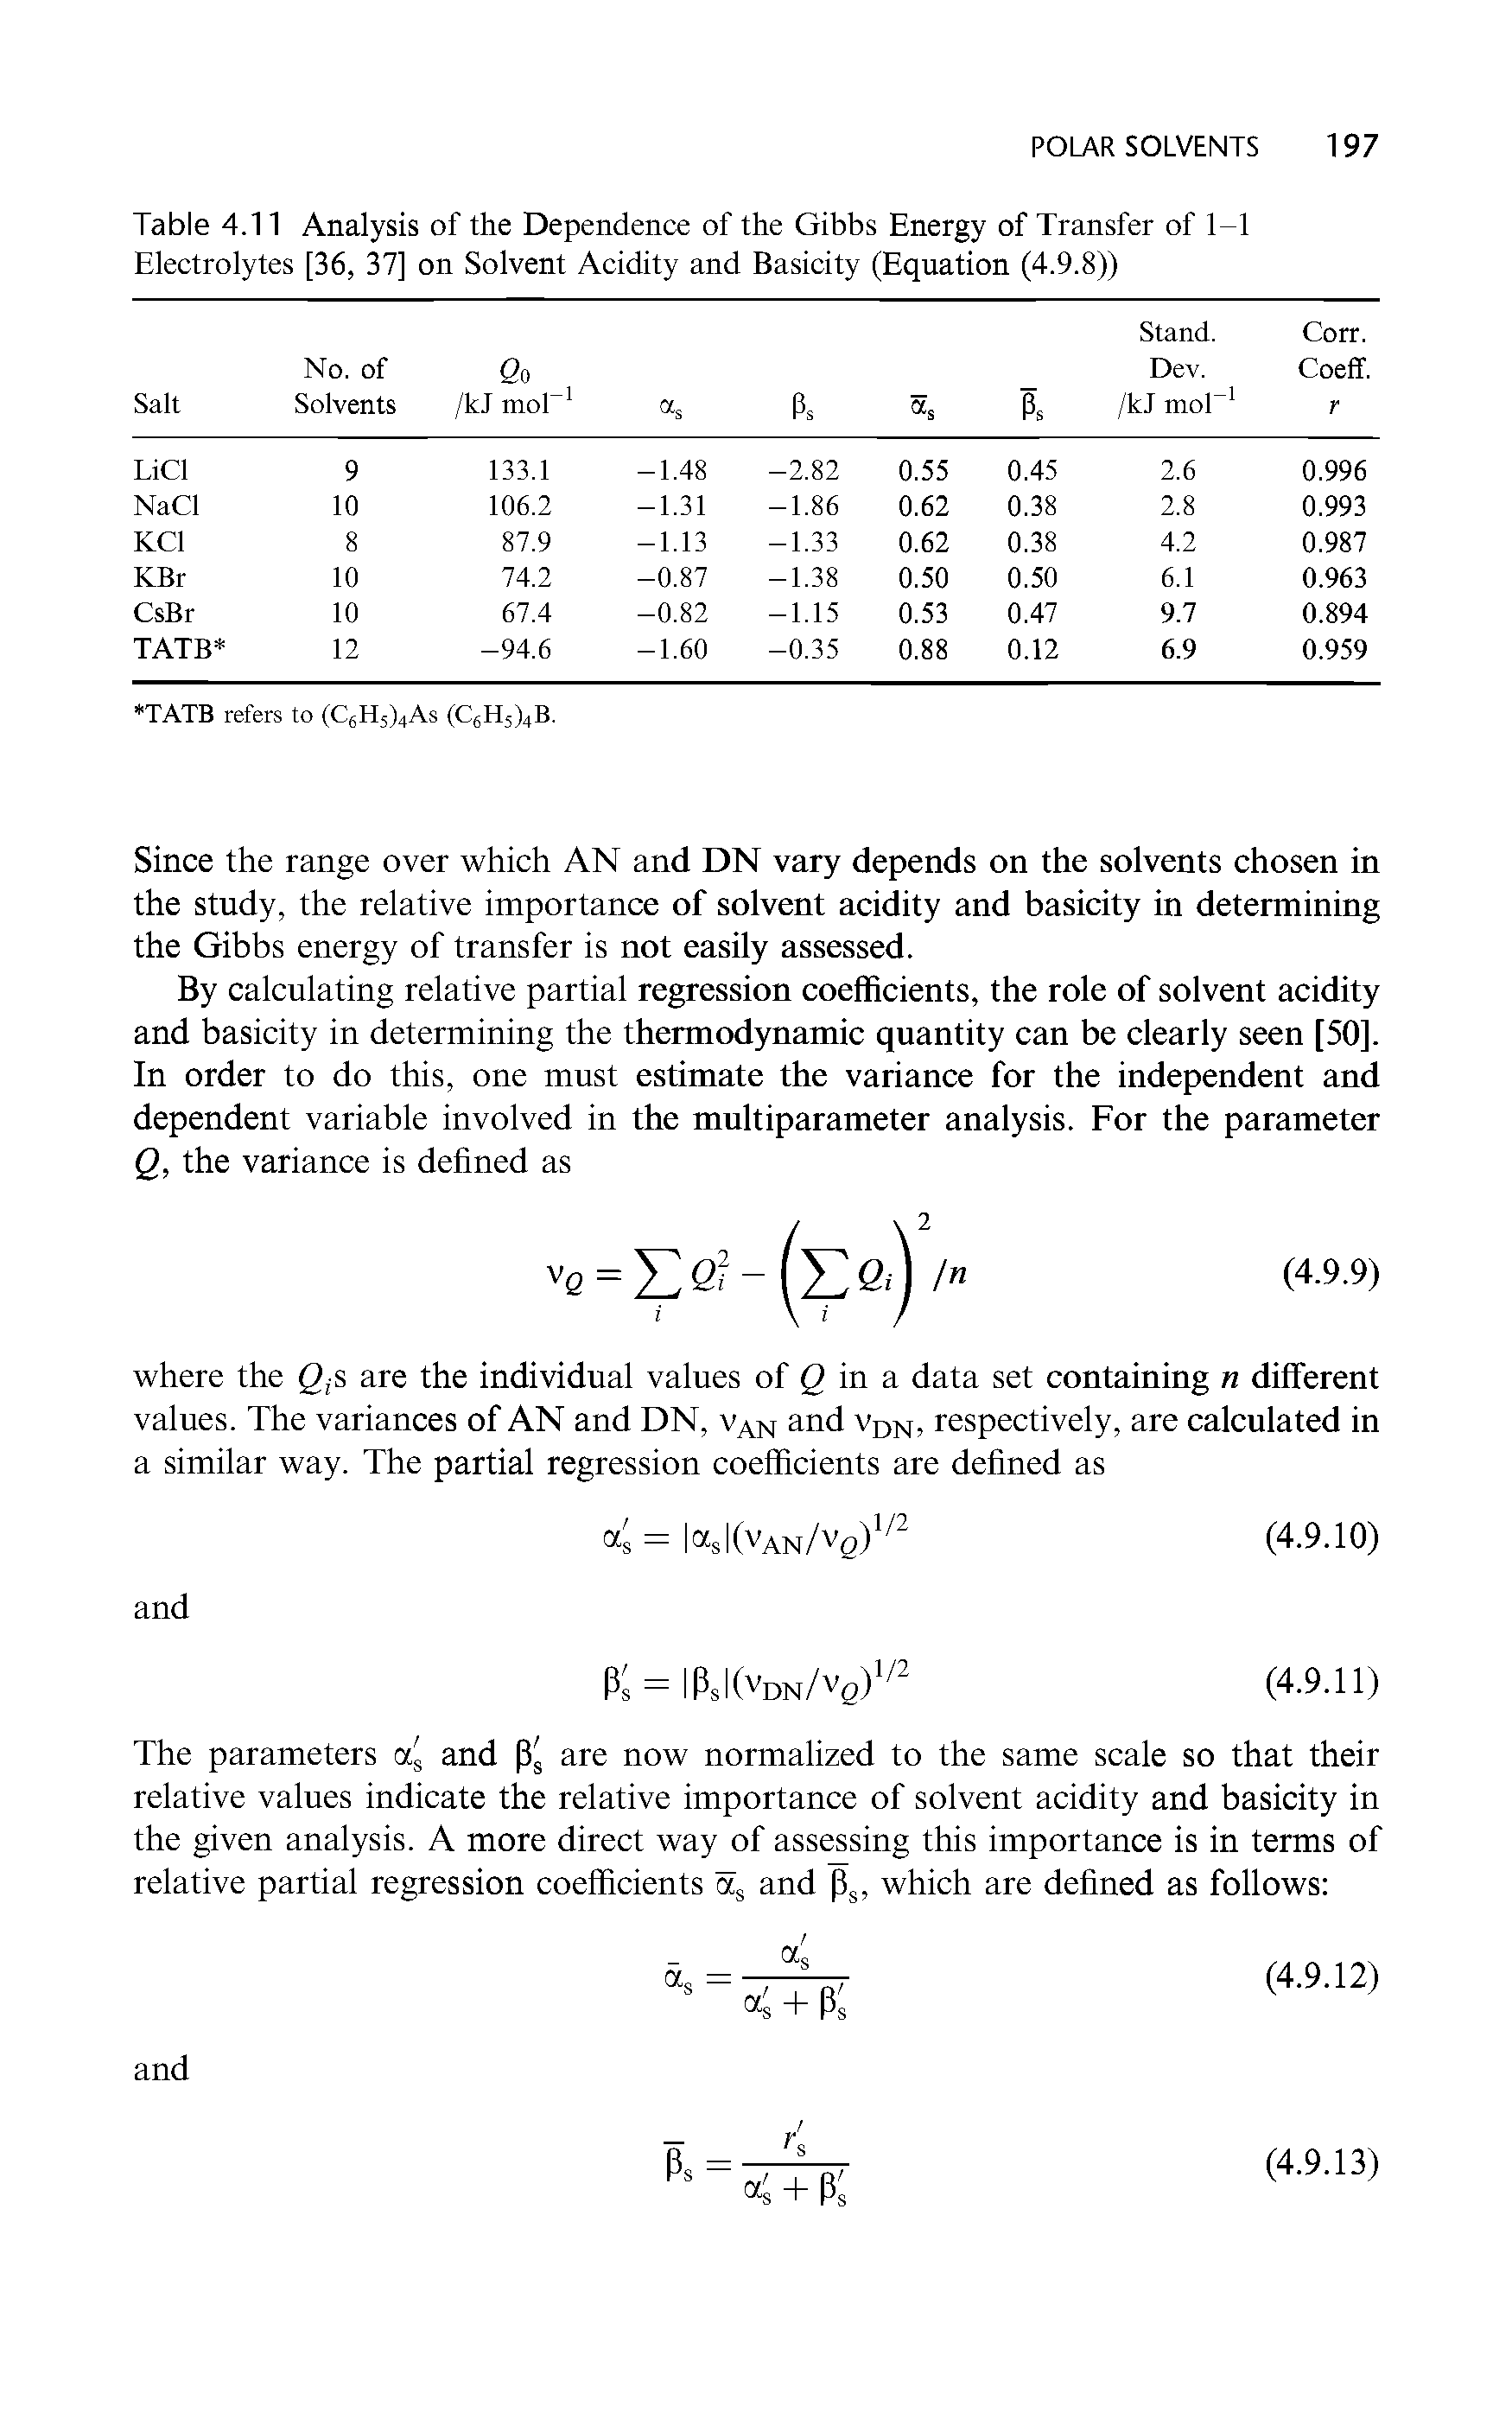 Table 4.11 Analysis of the Dependence of the Gibbs Energy of Transfer of 1-1 Electrolytes [36, 37] on Solvent Acidity and Basicity (Equation (4.9.8))...